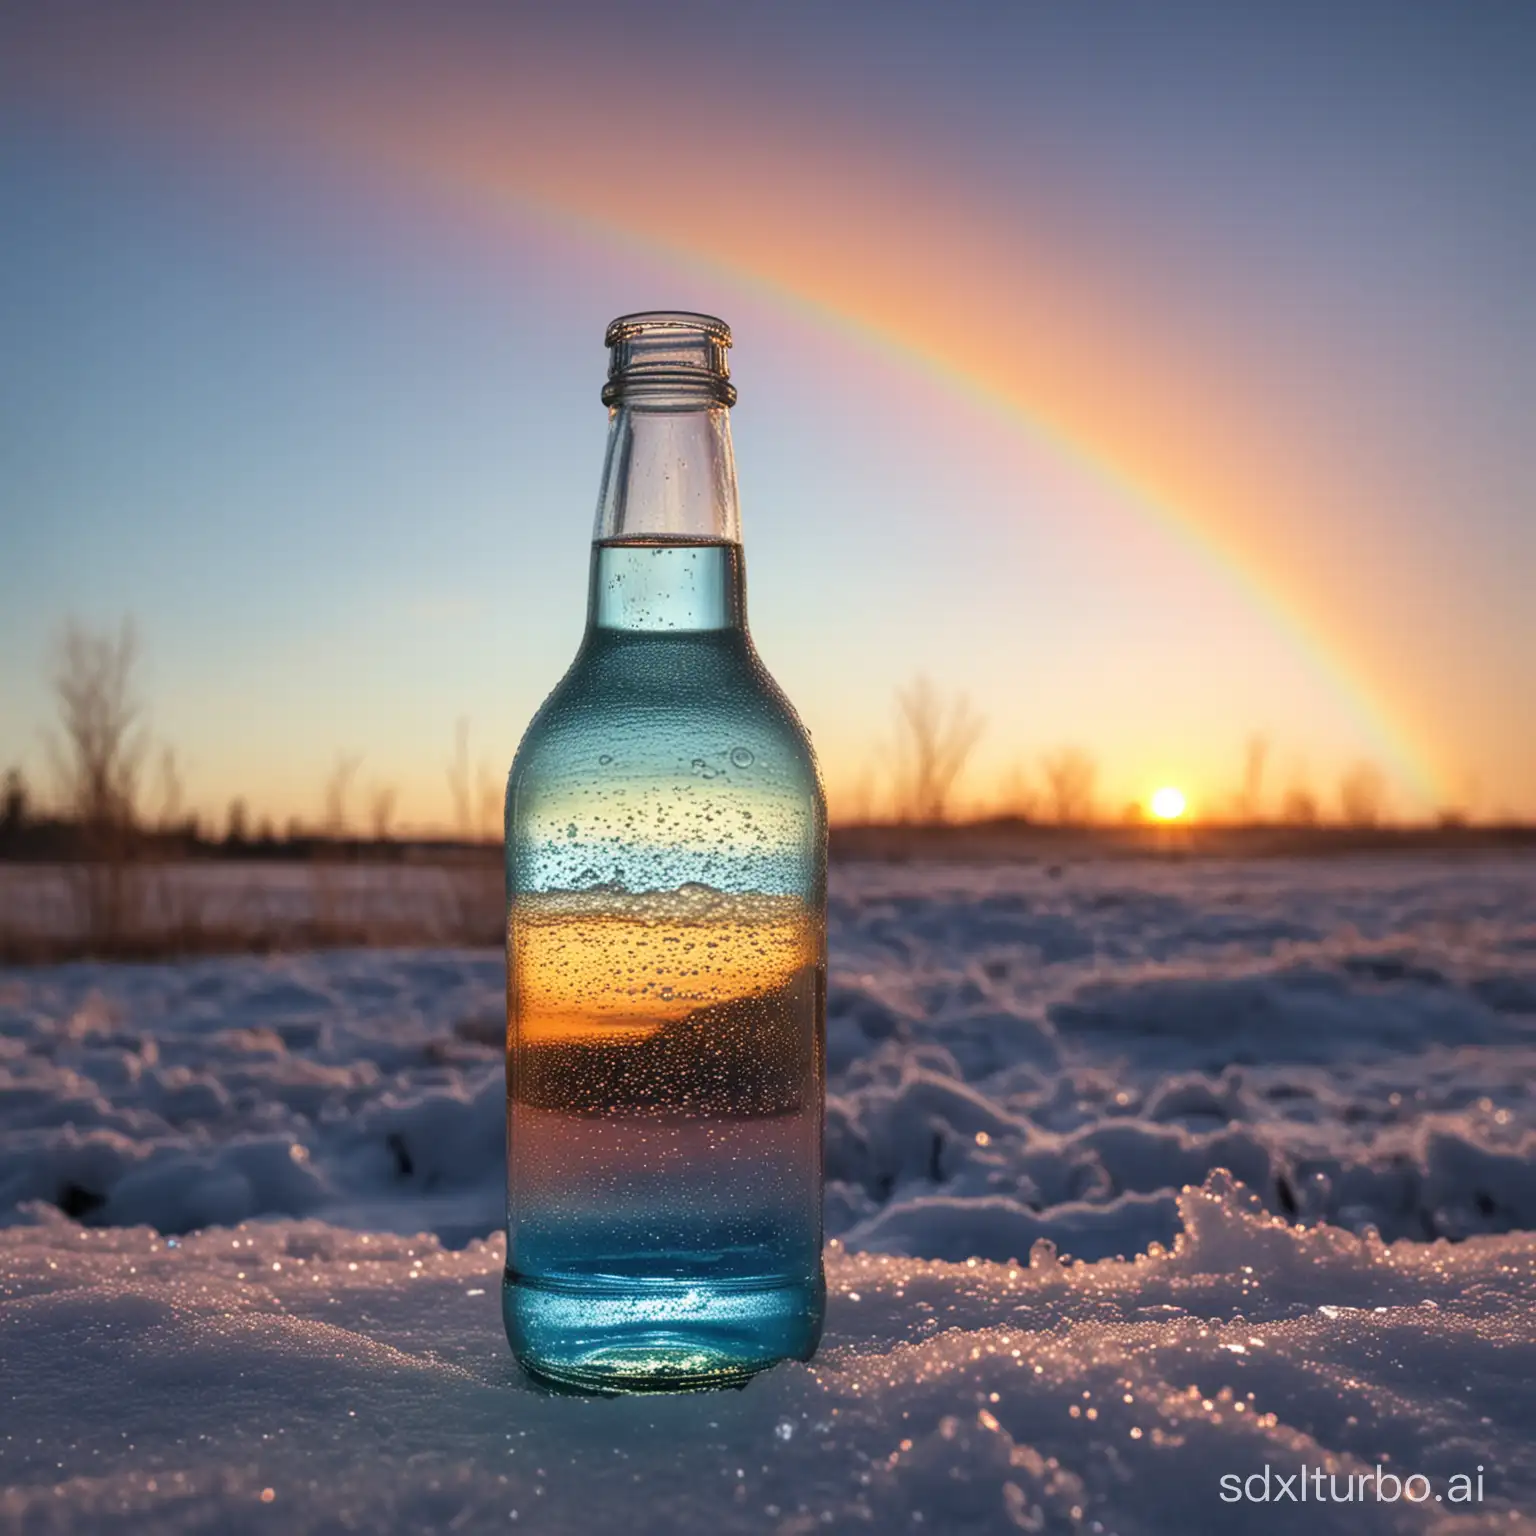 evening sunset scenery blue sky nature, glass bottle with a fizzy ice cold freezing rainbow liquid in it